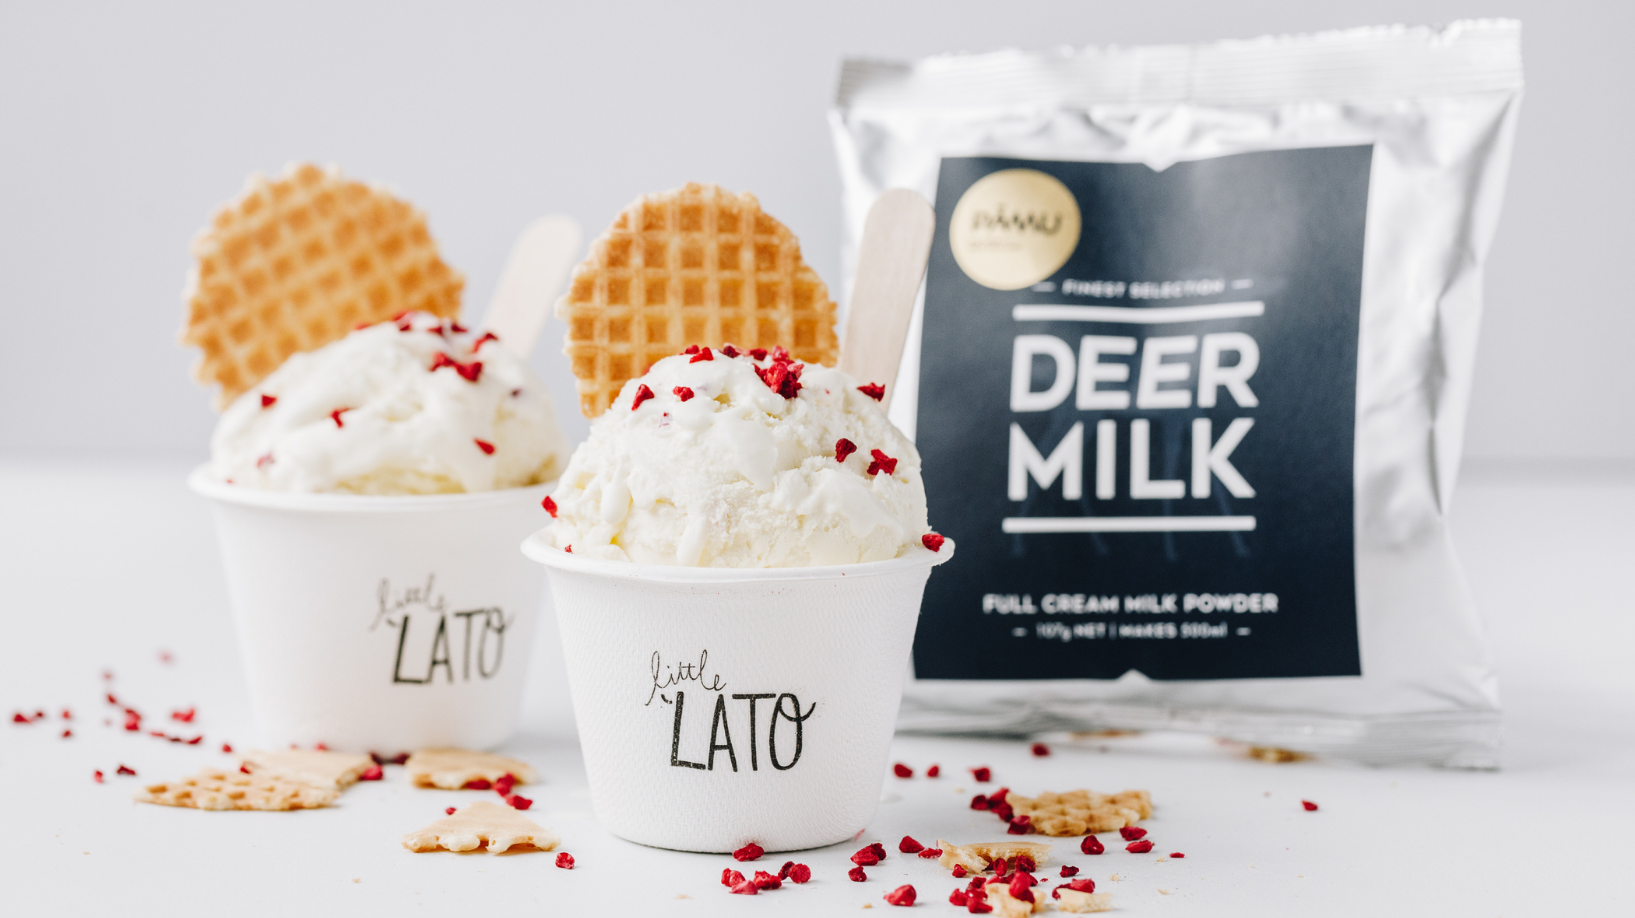 Little Lato and Pāmu team up with a Deerlicious Gelato for Christmas